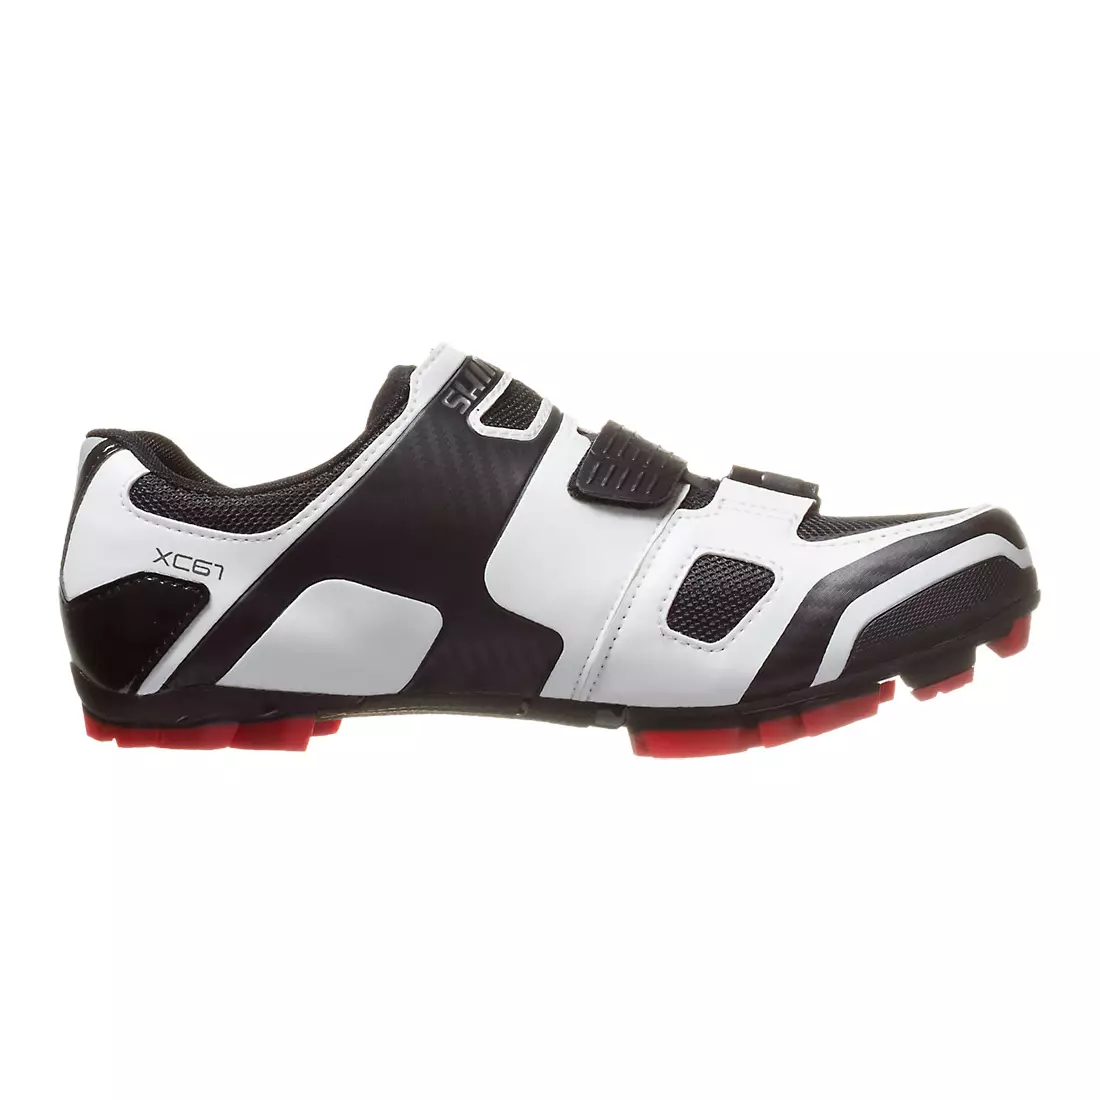 SHIMANO SH-XC61 - MTB cycling shoes, color: white and black